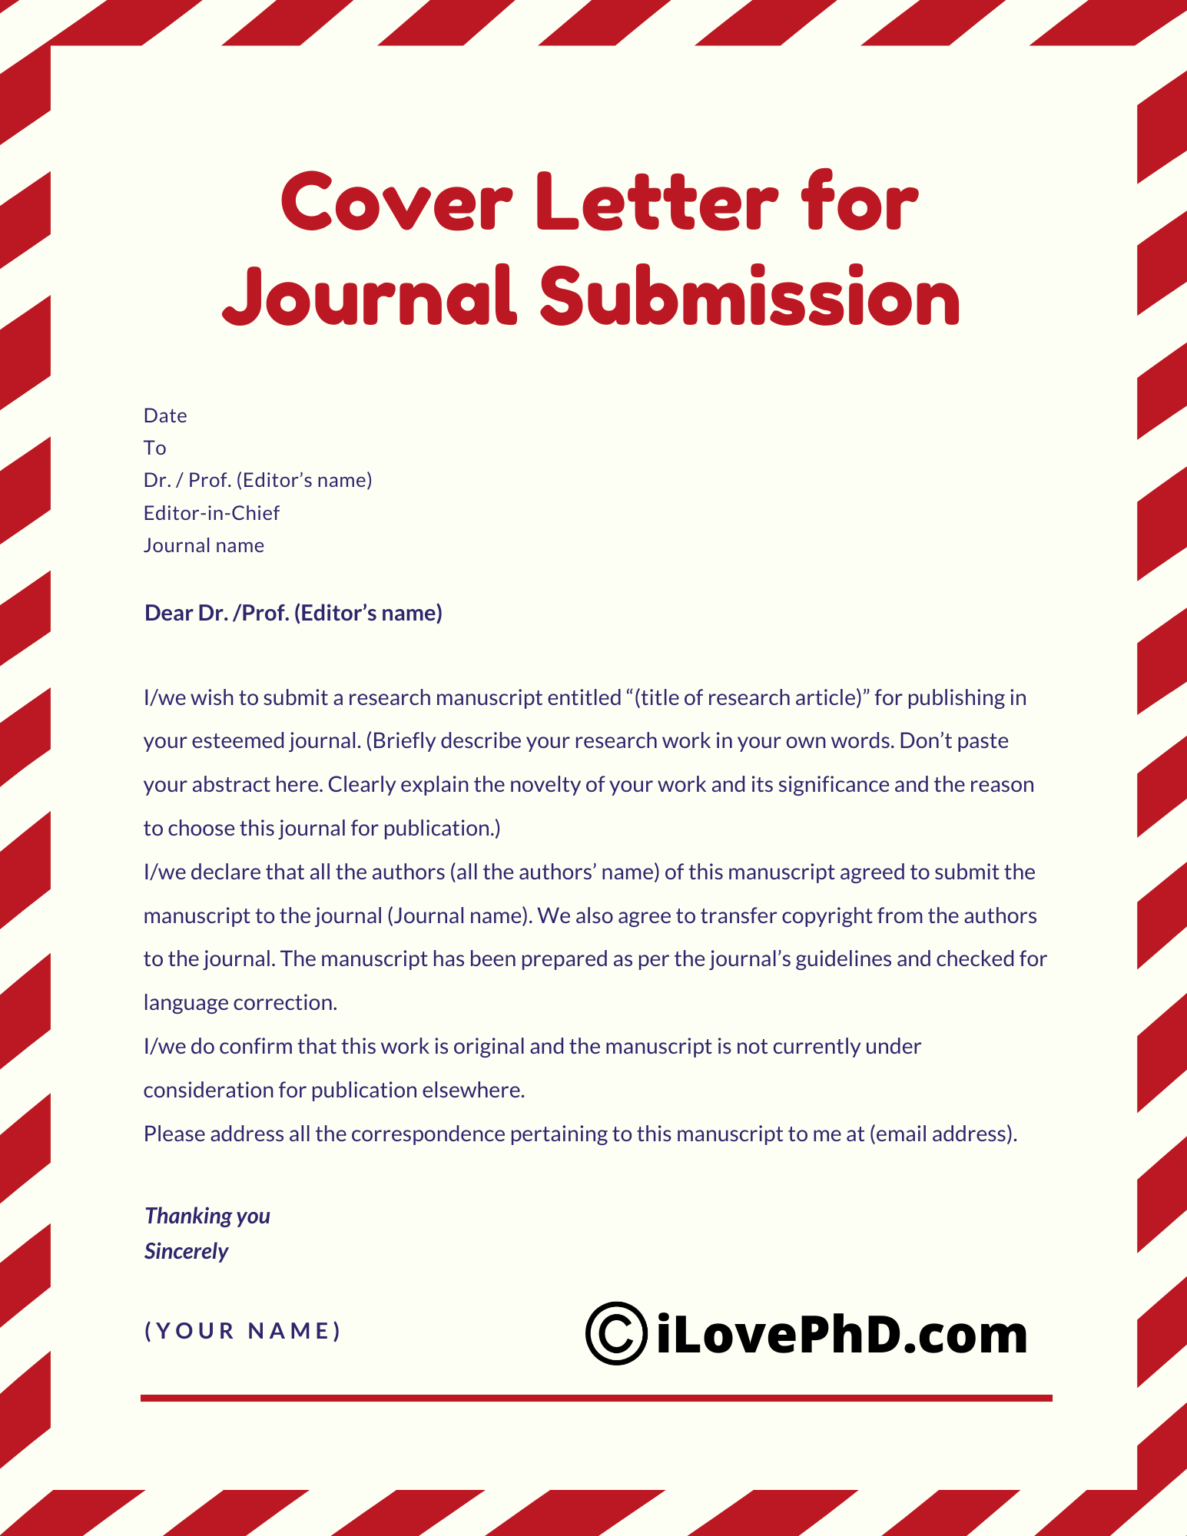 wall street journal cover letter